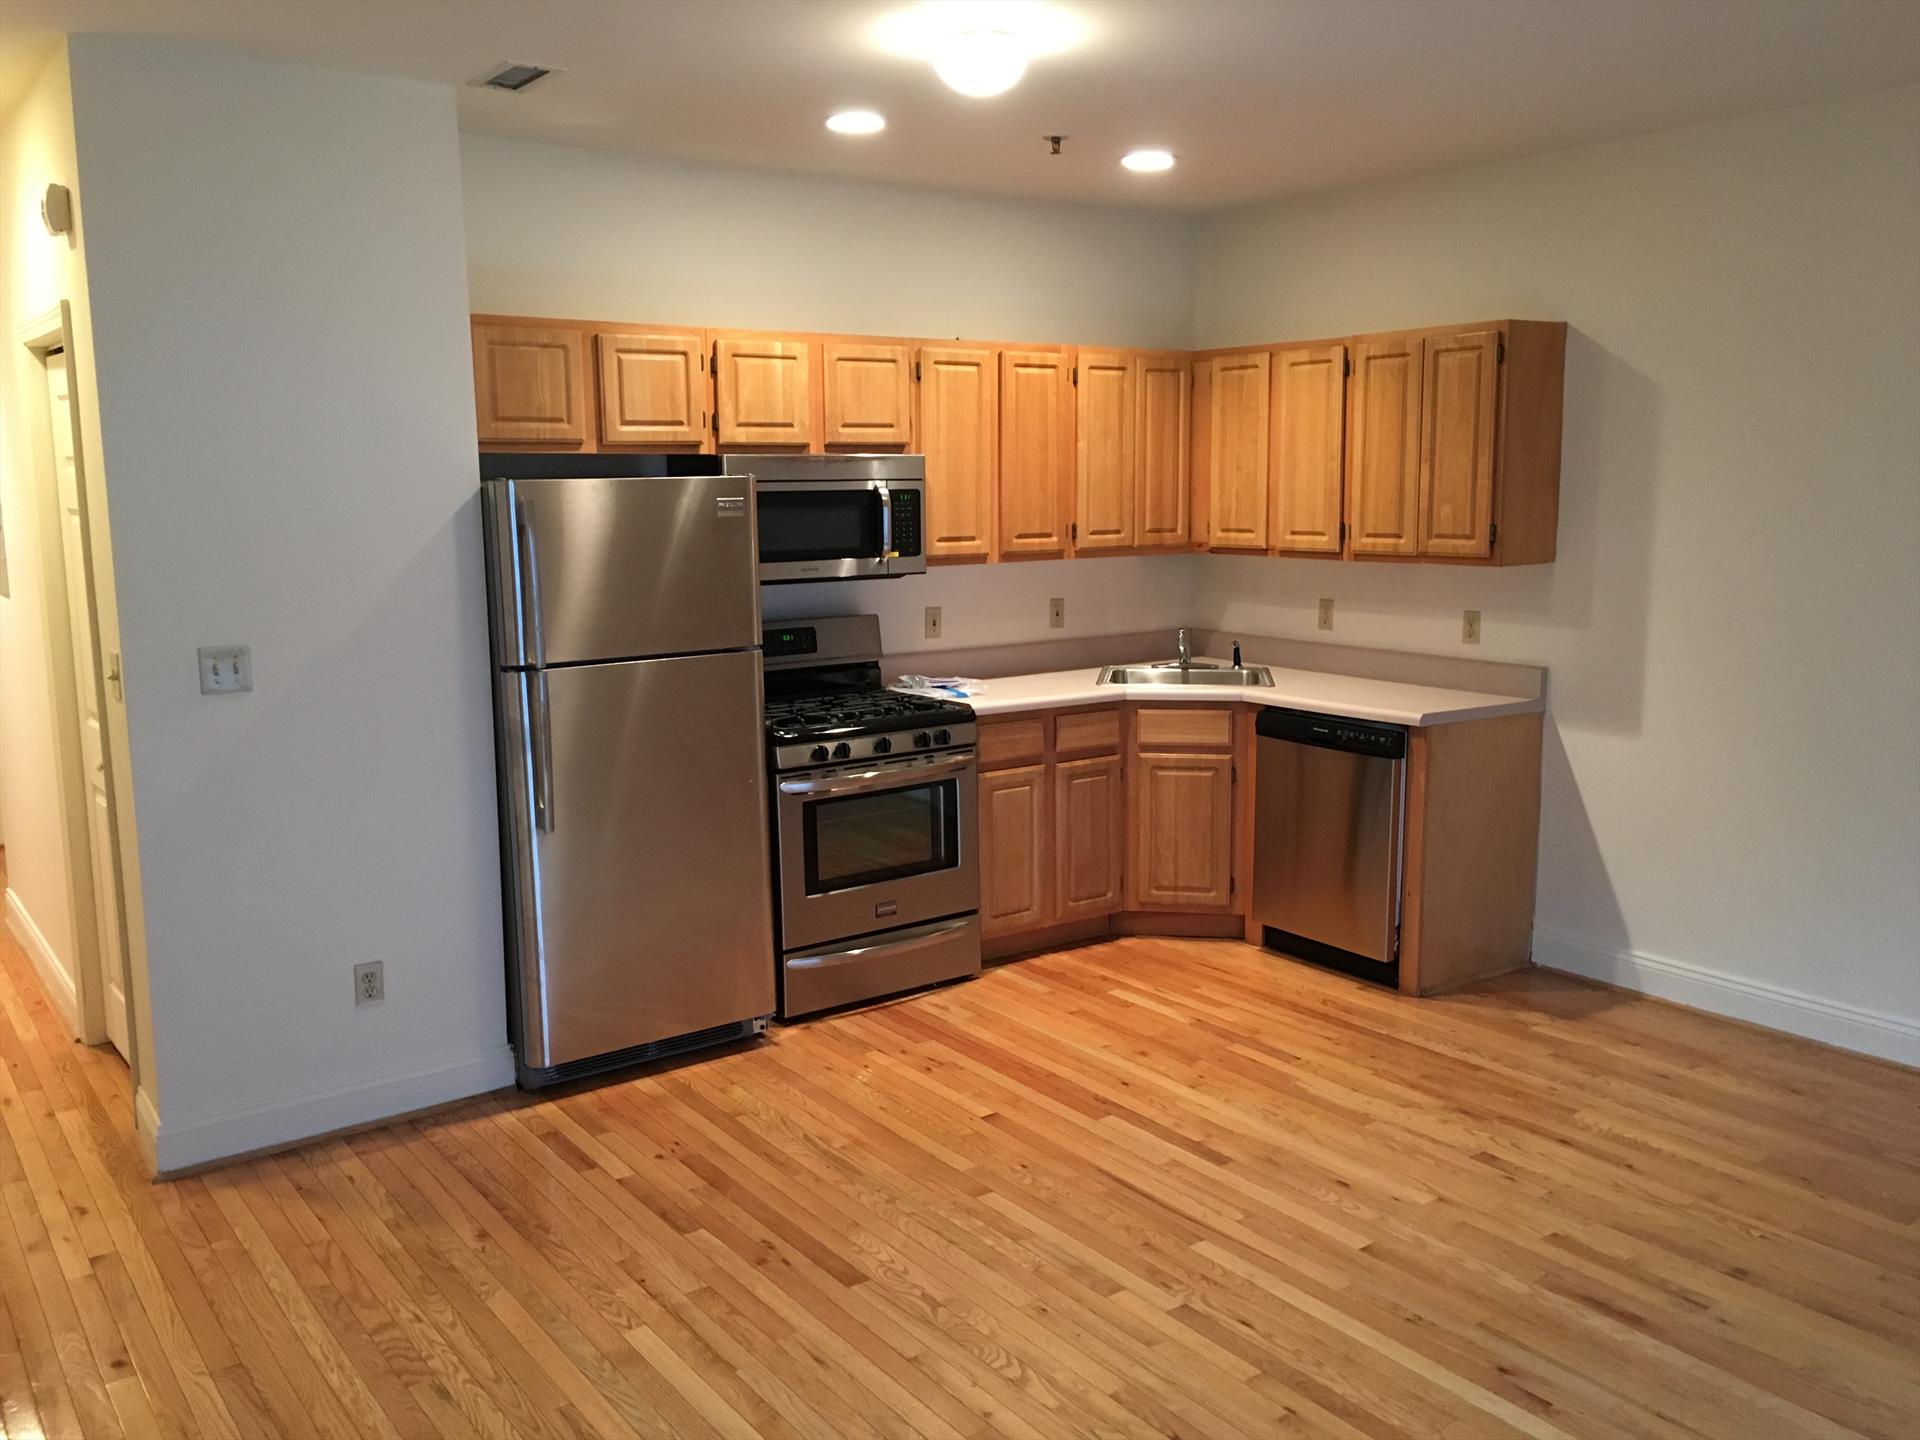 Must See!! Beautiful 2Bd/2Bth Apt in an Elevator Bldg, Featuring:  All Stainless-Steel Appliances, Oven Range, Microwave, Refrigerator, Dish Washer, Central Ac/Heat, Coat Closet, Hardwood Floors in Living Room and Carpet in Bedrooms. Laundry Room, Garage Parking is $275 Subject to Availability… Pets Allowed for additional fees and it is subject to landlord’s approval. Won’t Last!! Some of the Pictures are not from the actual apartment is only to give you a basic Idea.



